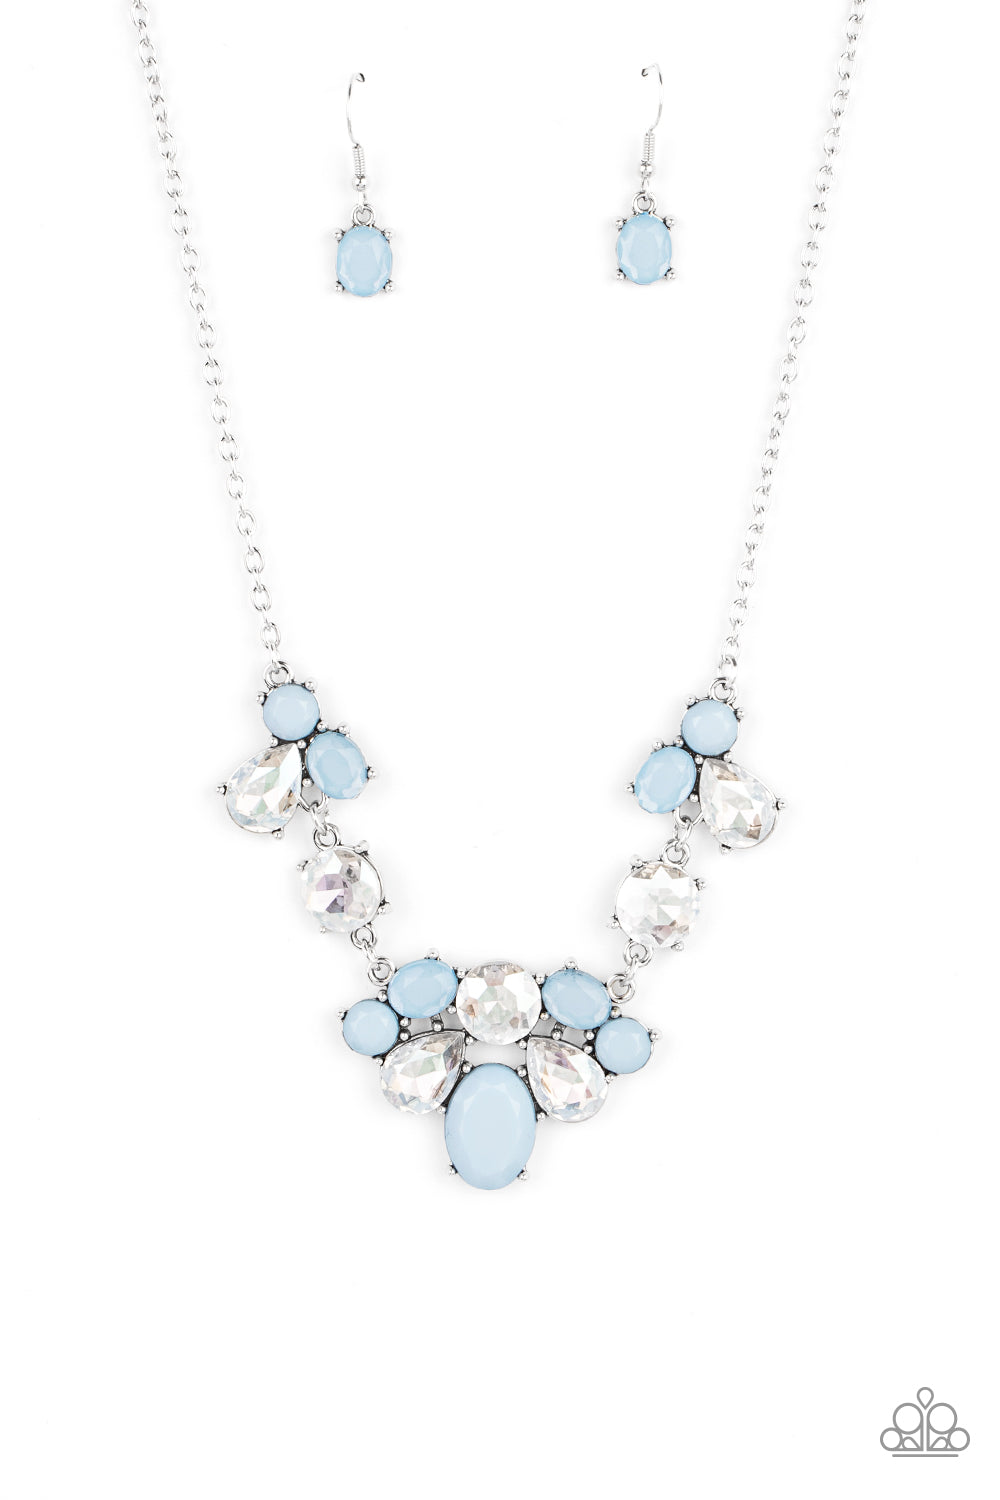 Paparazzi Accessories - Ethereal Romance #N681 - Blue Necklace